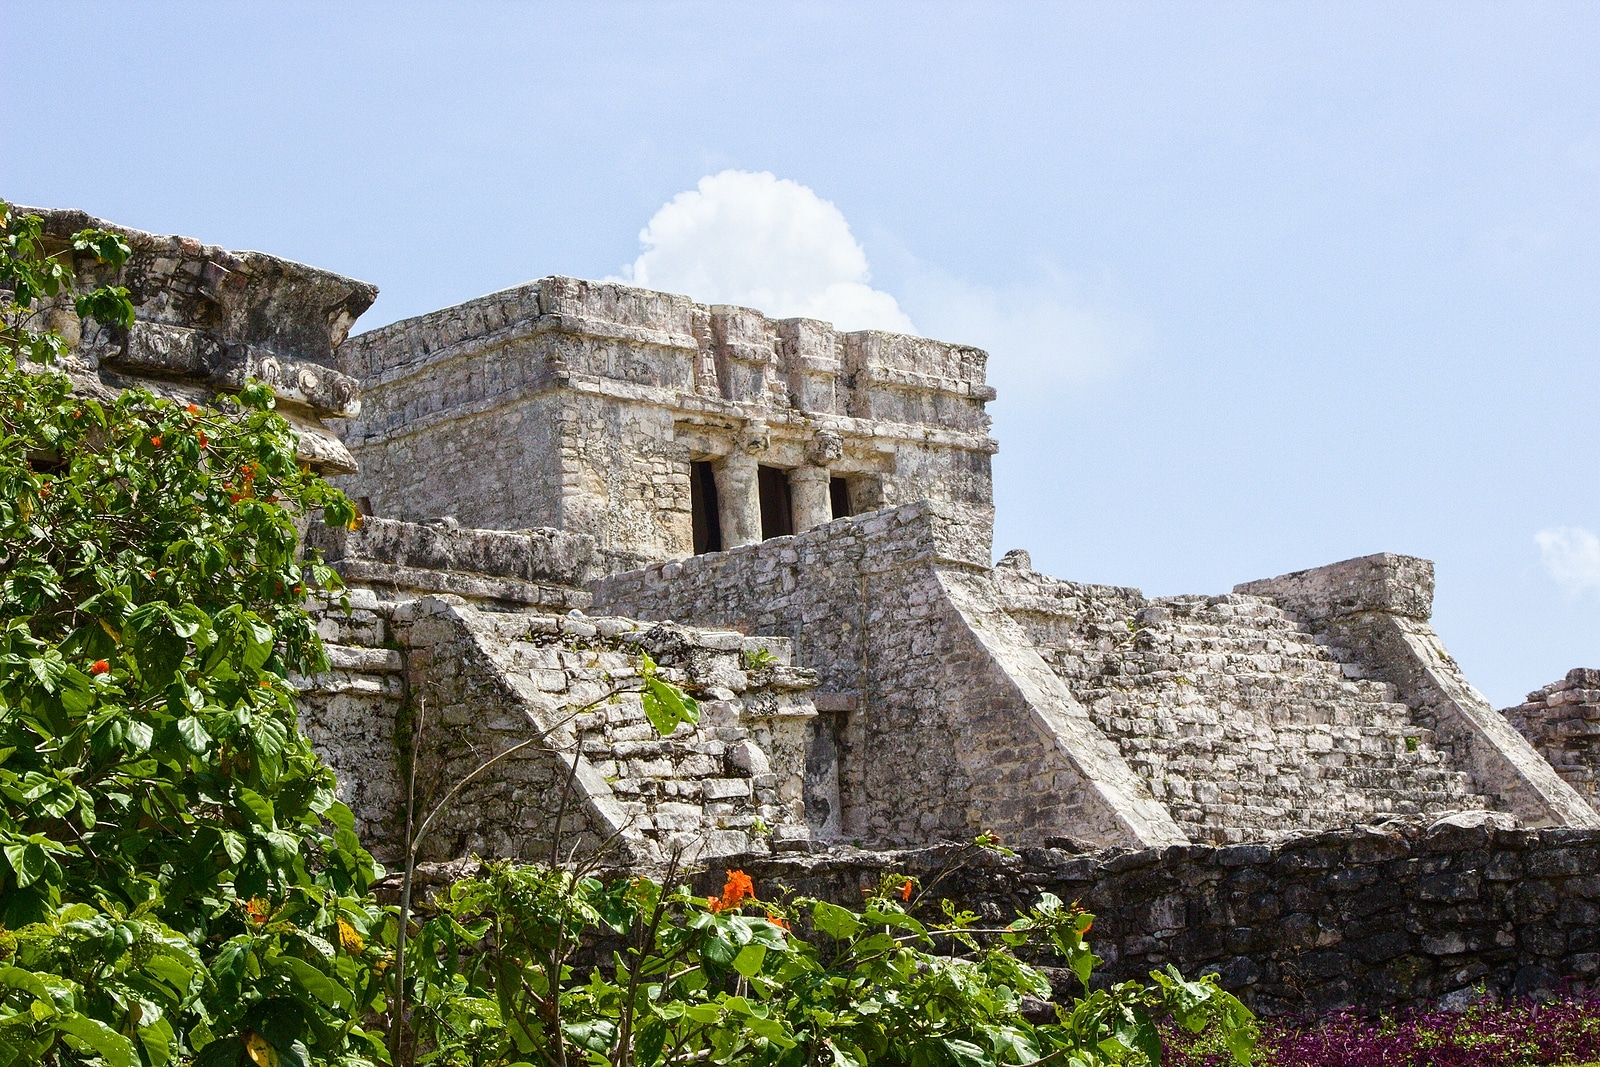 View of an old Mayan temple in Cancun Mexico